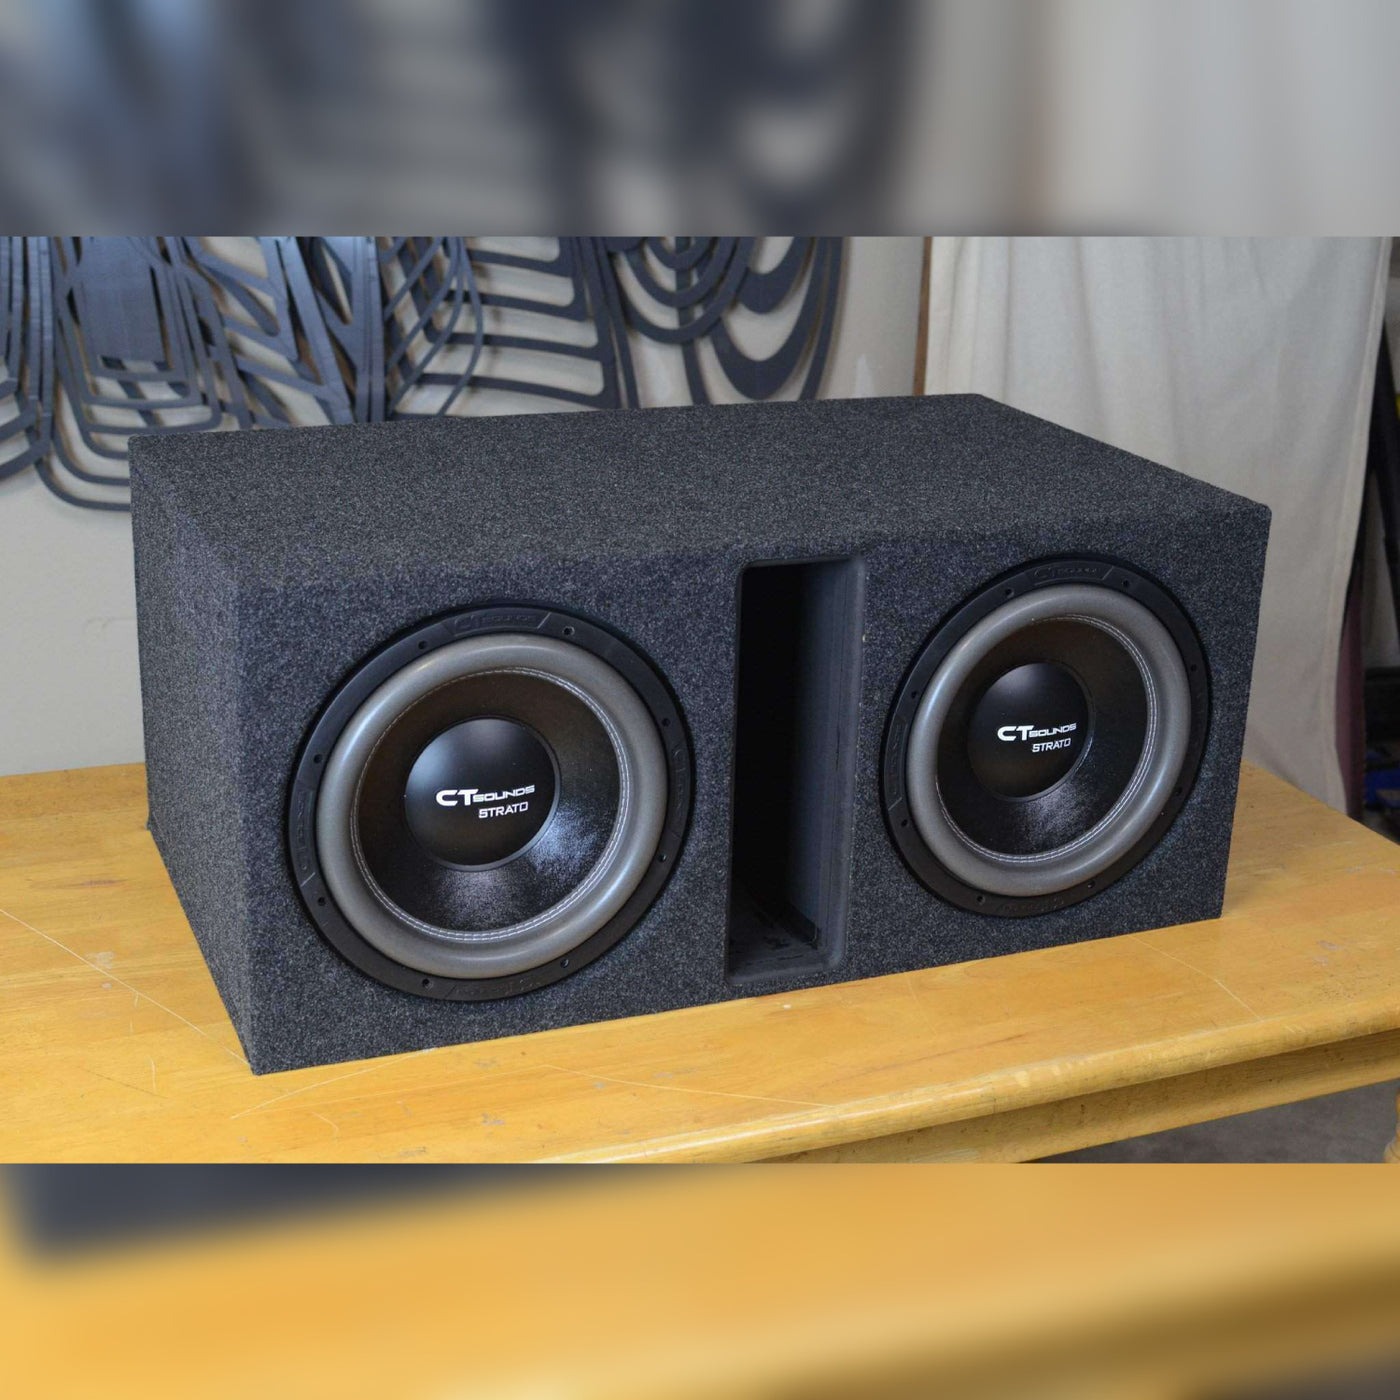 Dual 12 Inch PORTED Subwoofer Box Design - CT SOUNDS